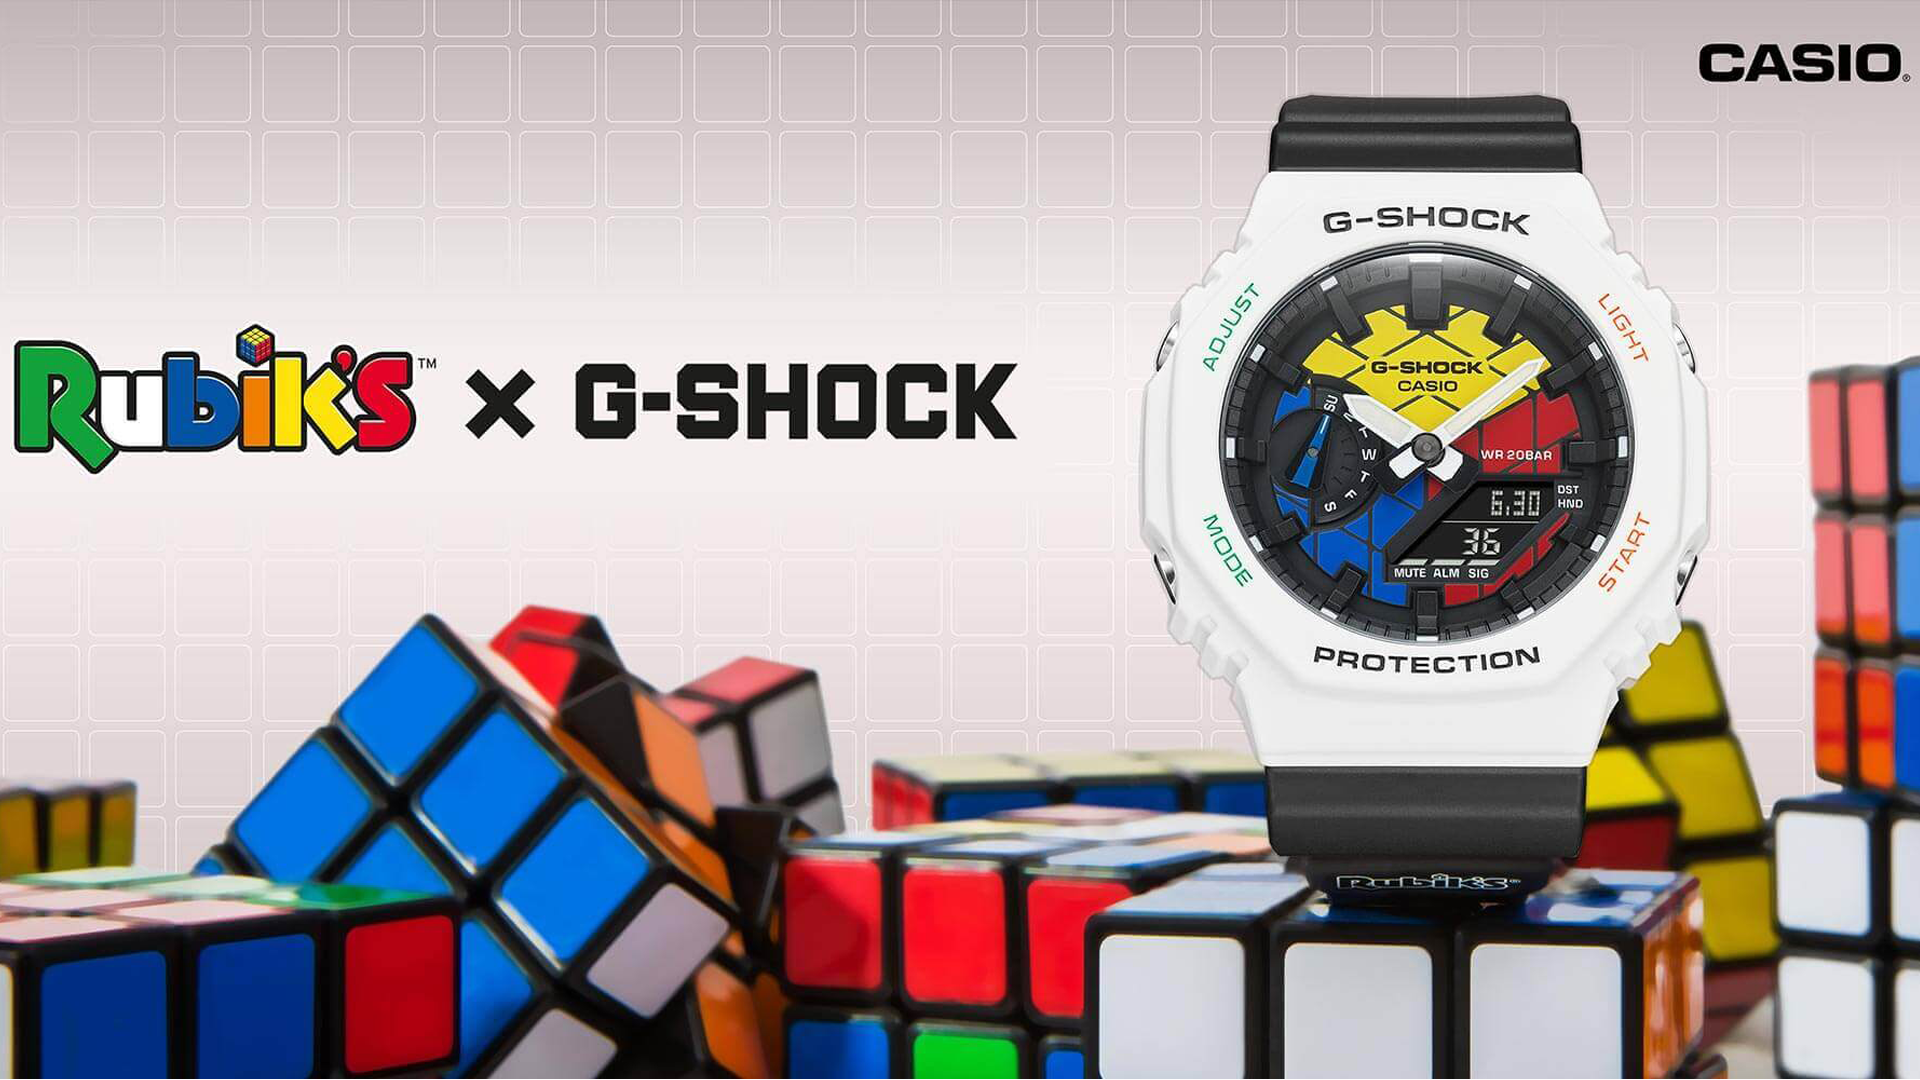 Casio Goes Retro with a New Rubik’s Cube-Inspired G-Shock Watch